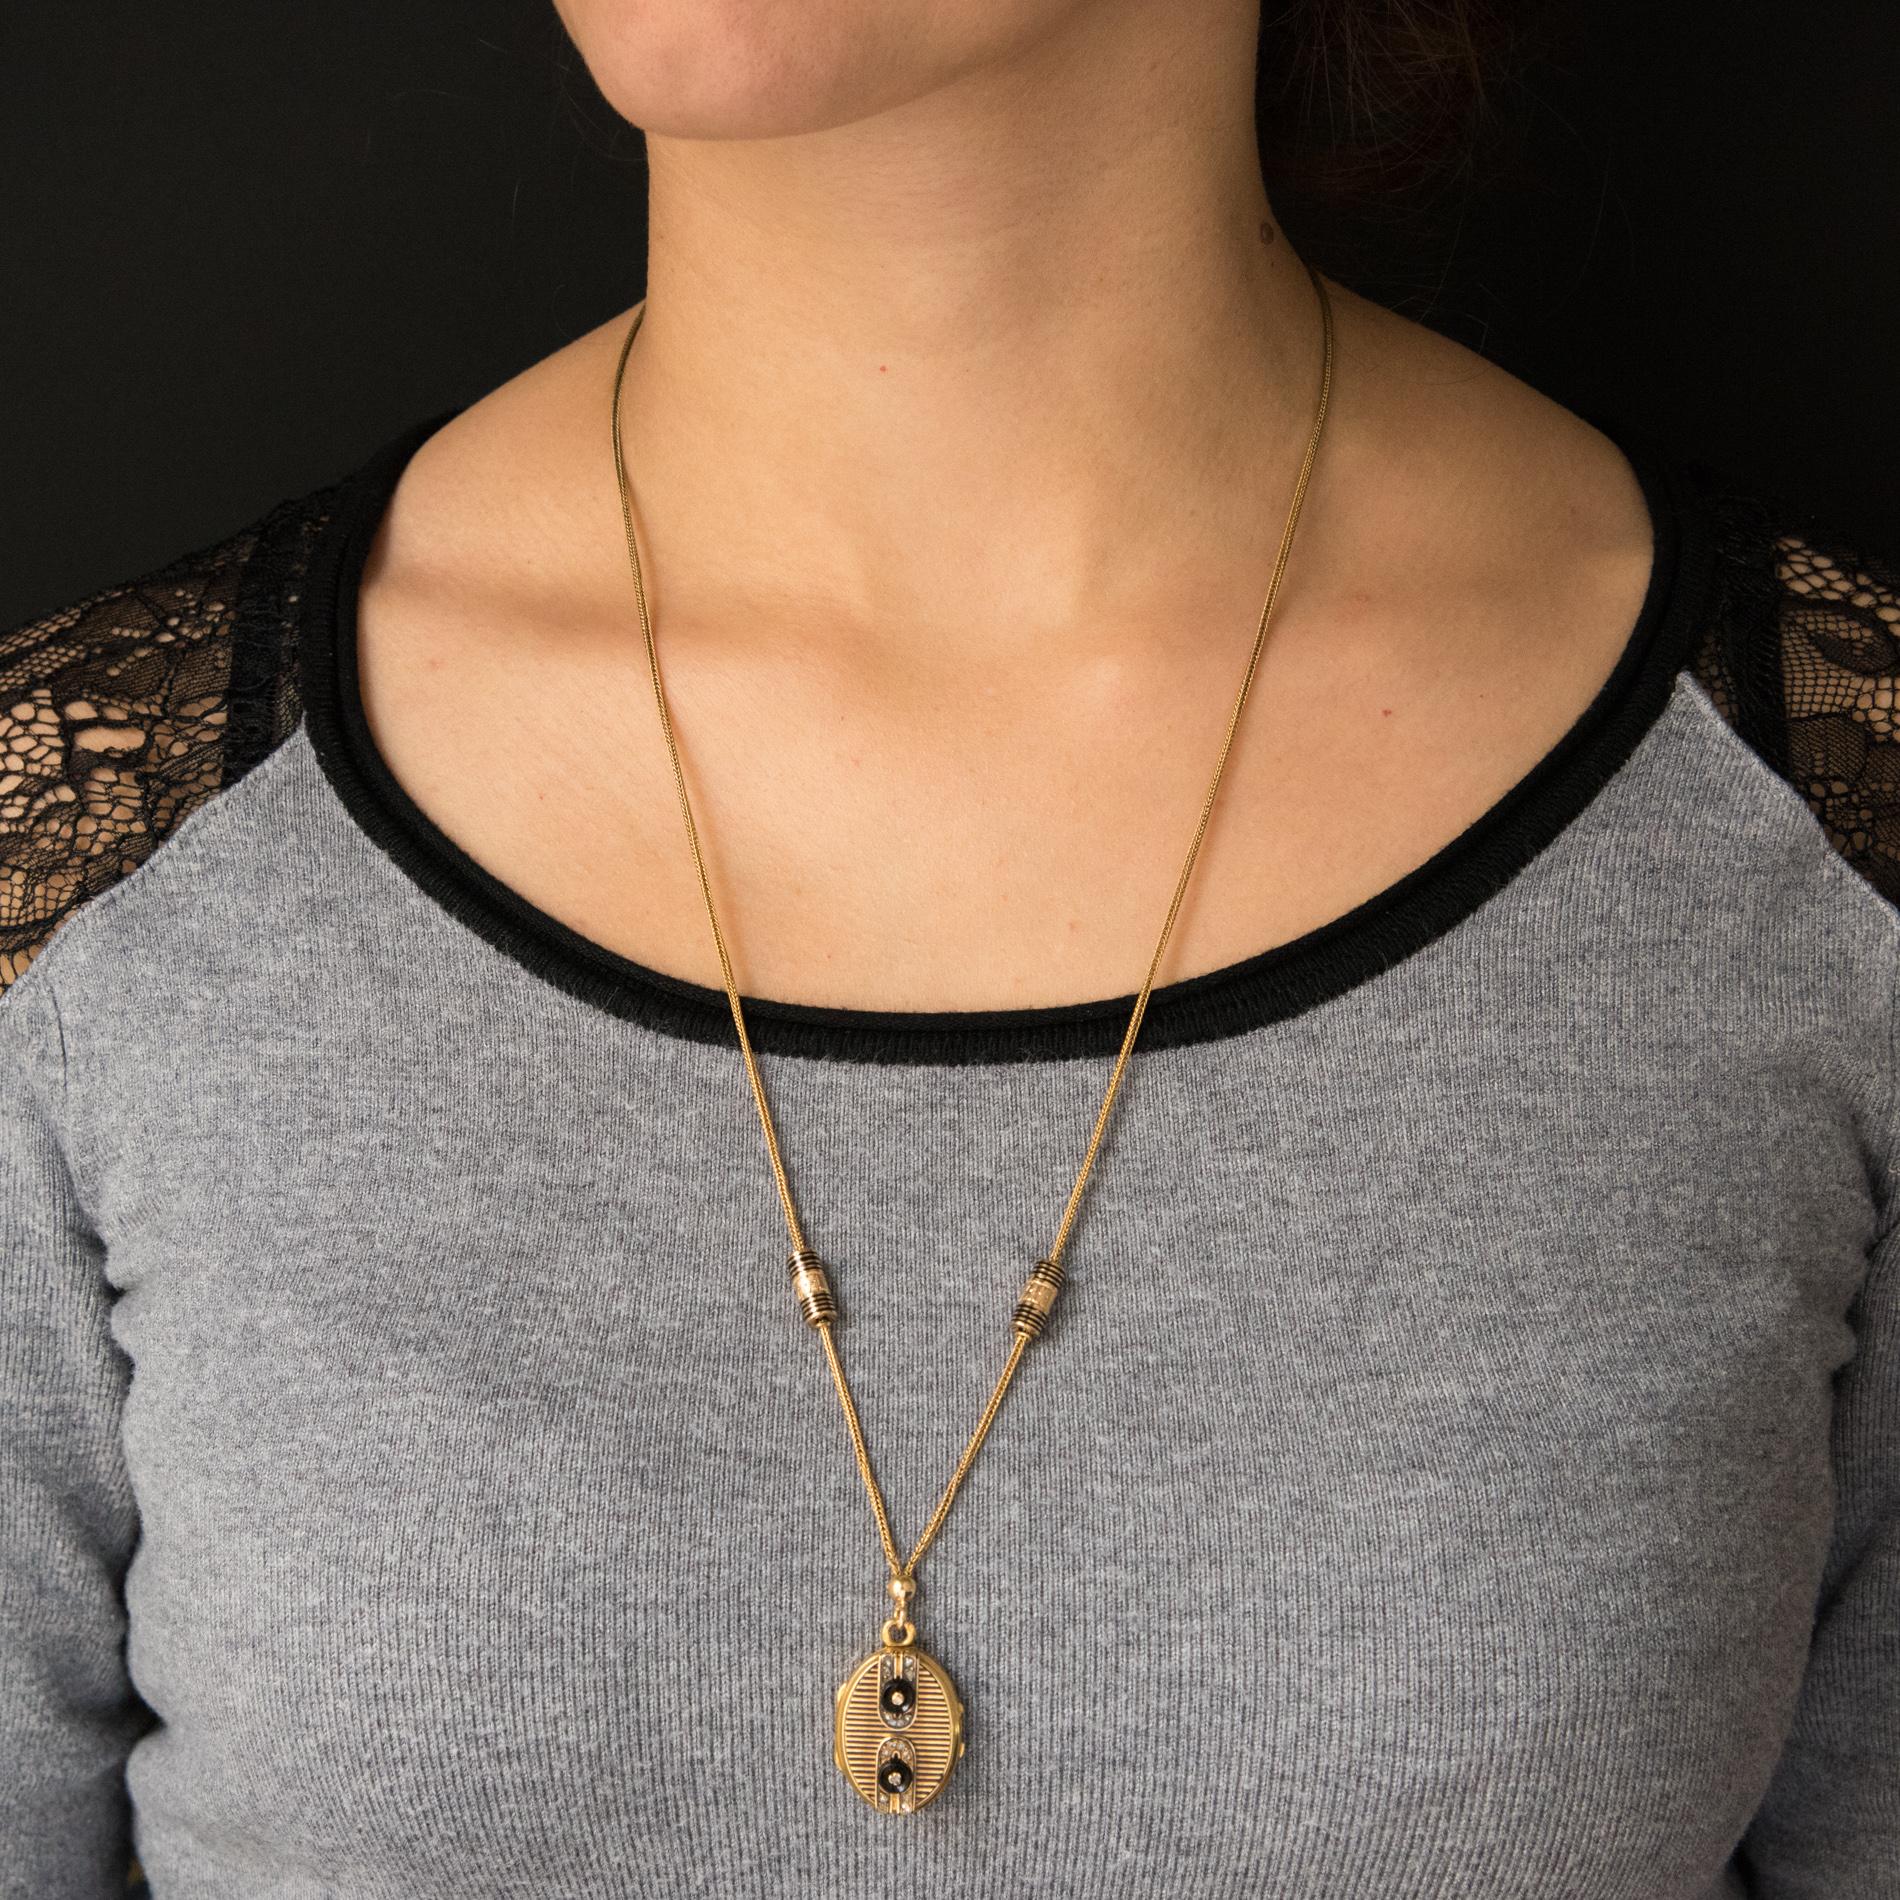 Pendant and its chain in 18 karats yellow gold, eagle's head hallmark.
This splendid antique necklace is composed of a column mesh chain on which slide cylindrical enamelled runners of black and chiselled lines which abut on small rings. This